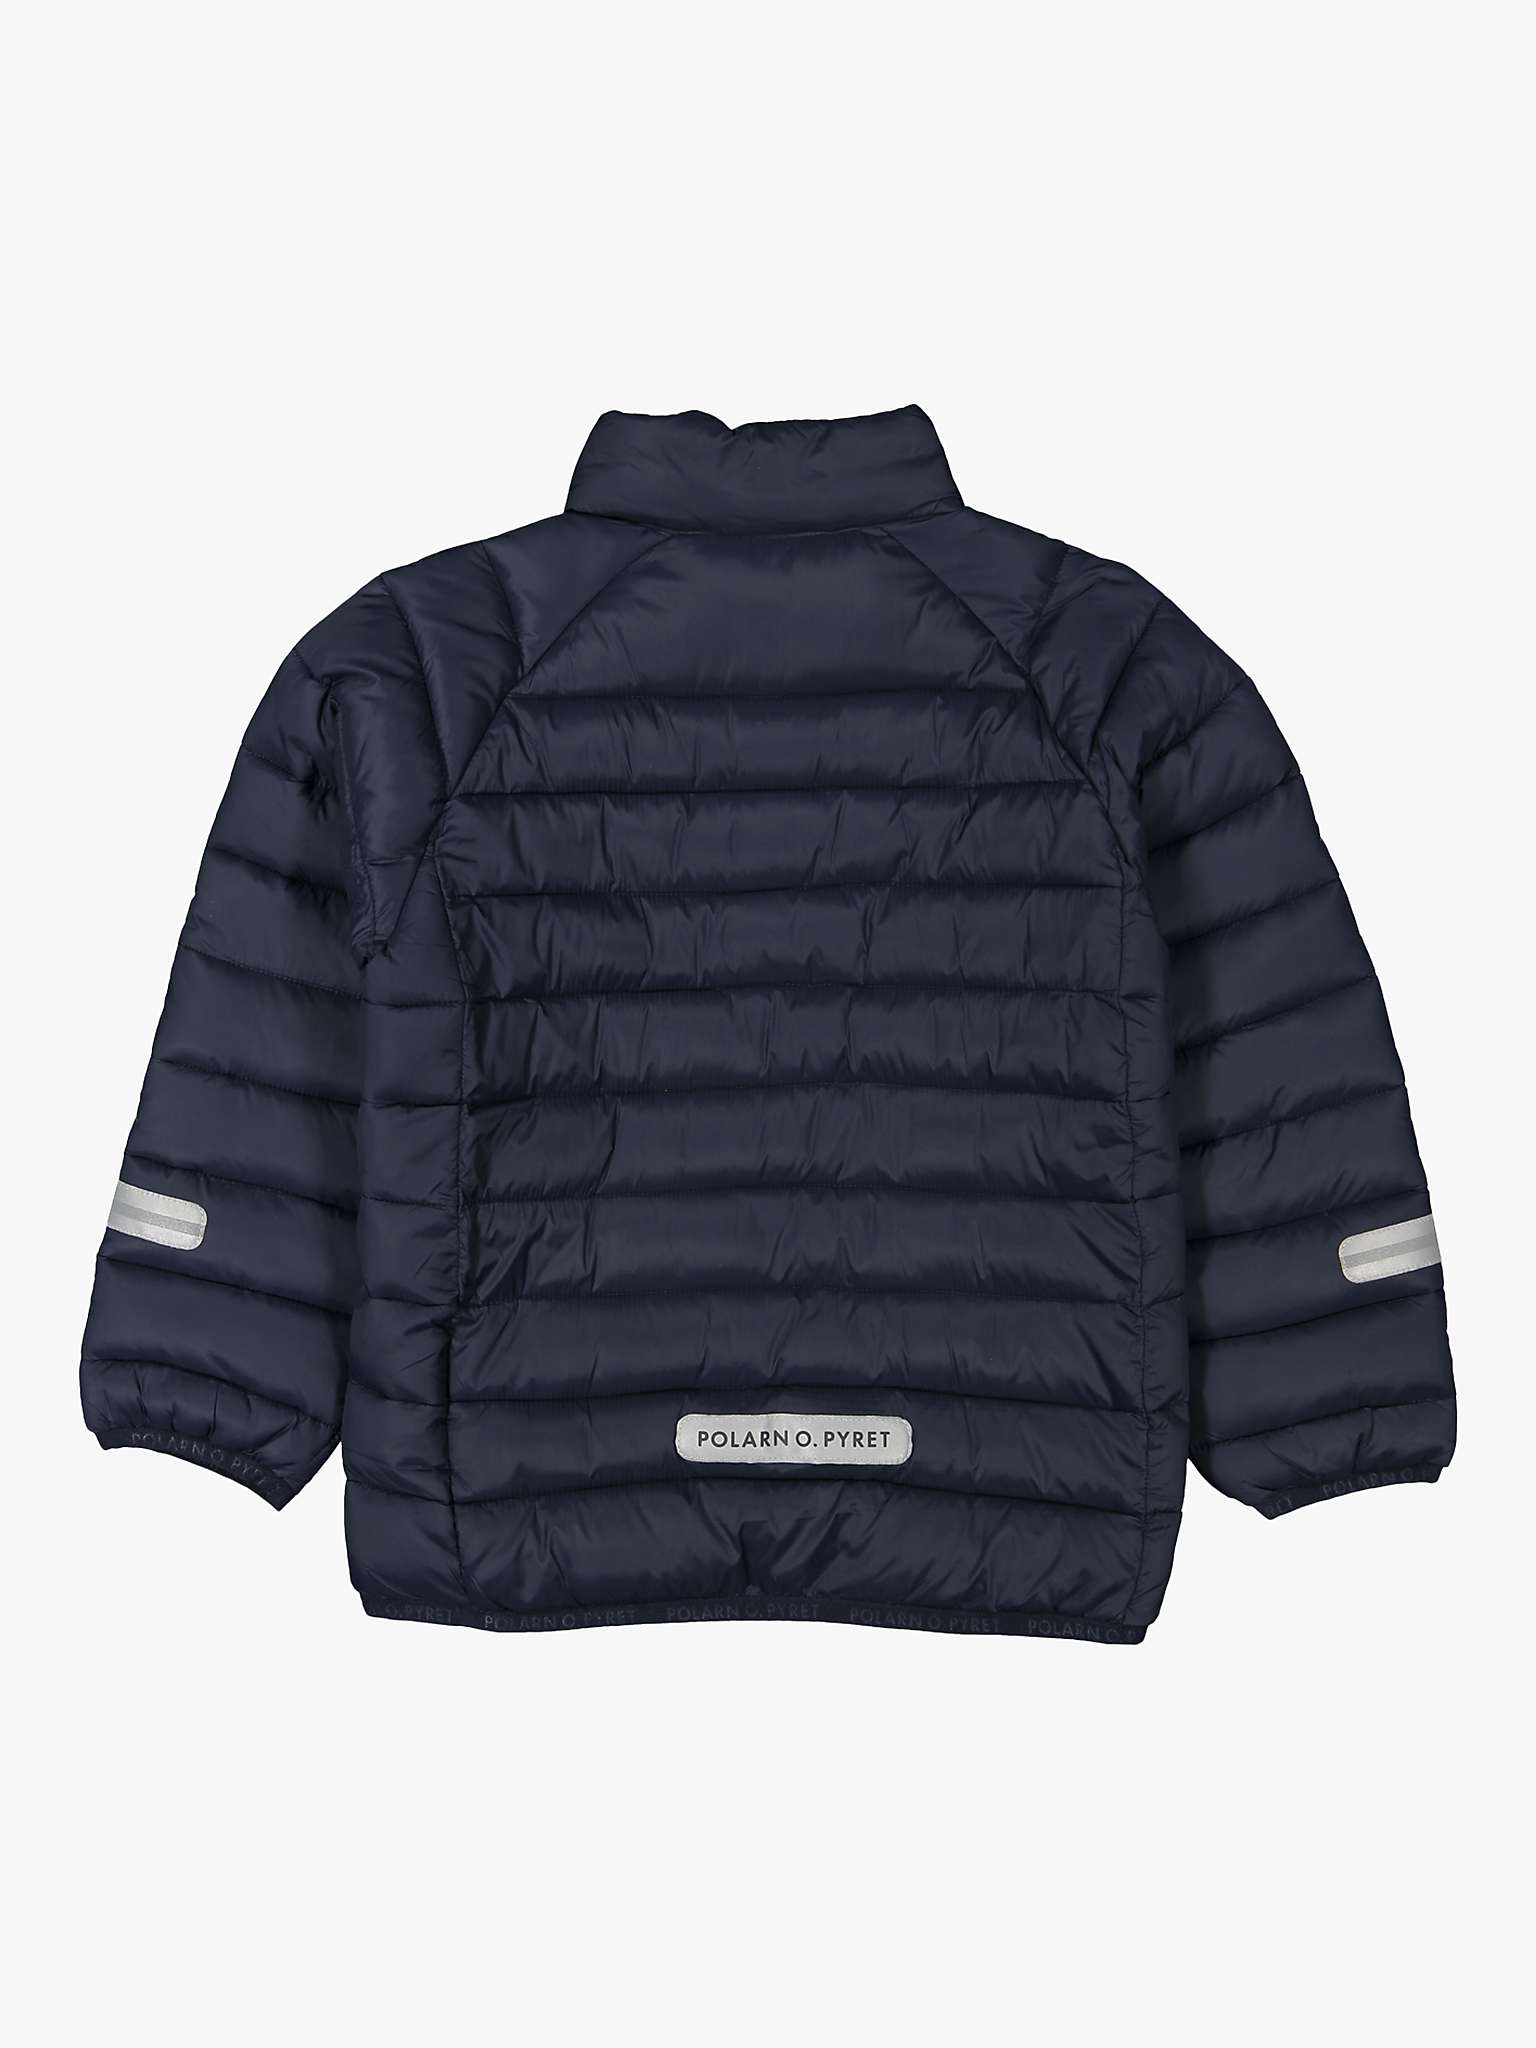 Buy Polarn O. Pyret Children's Water Resistant Puffer Jacket, Navy Online at johnlewis.com